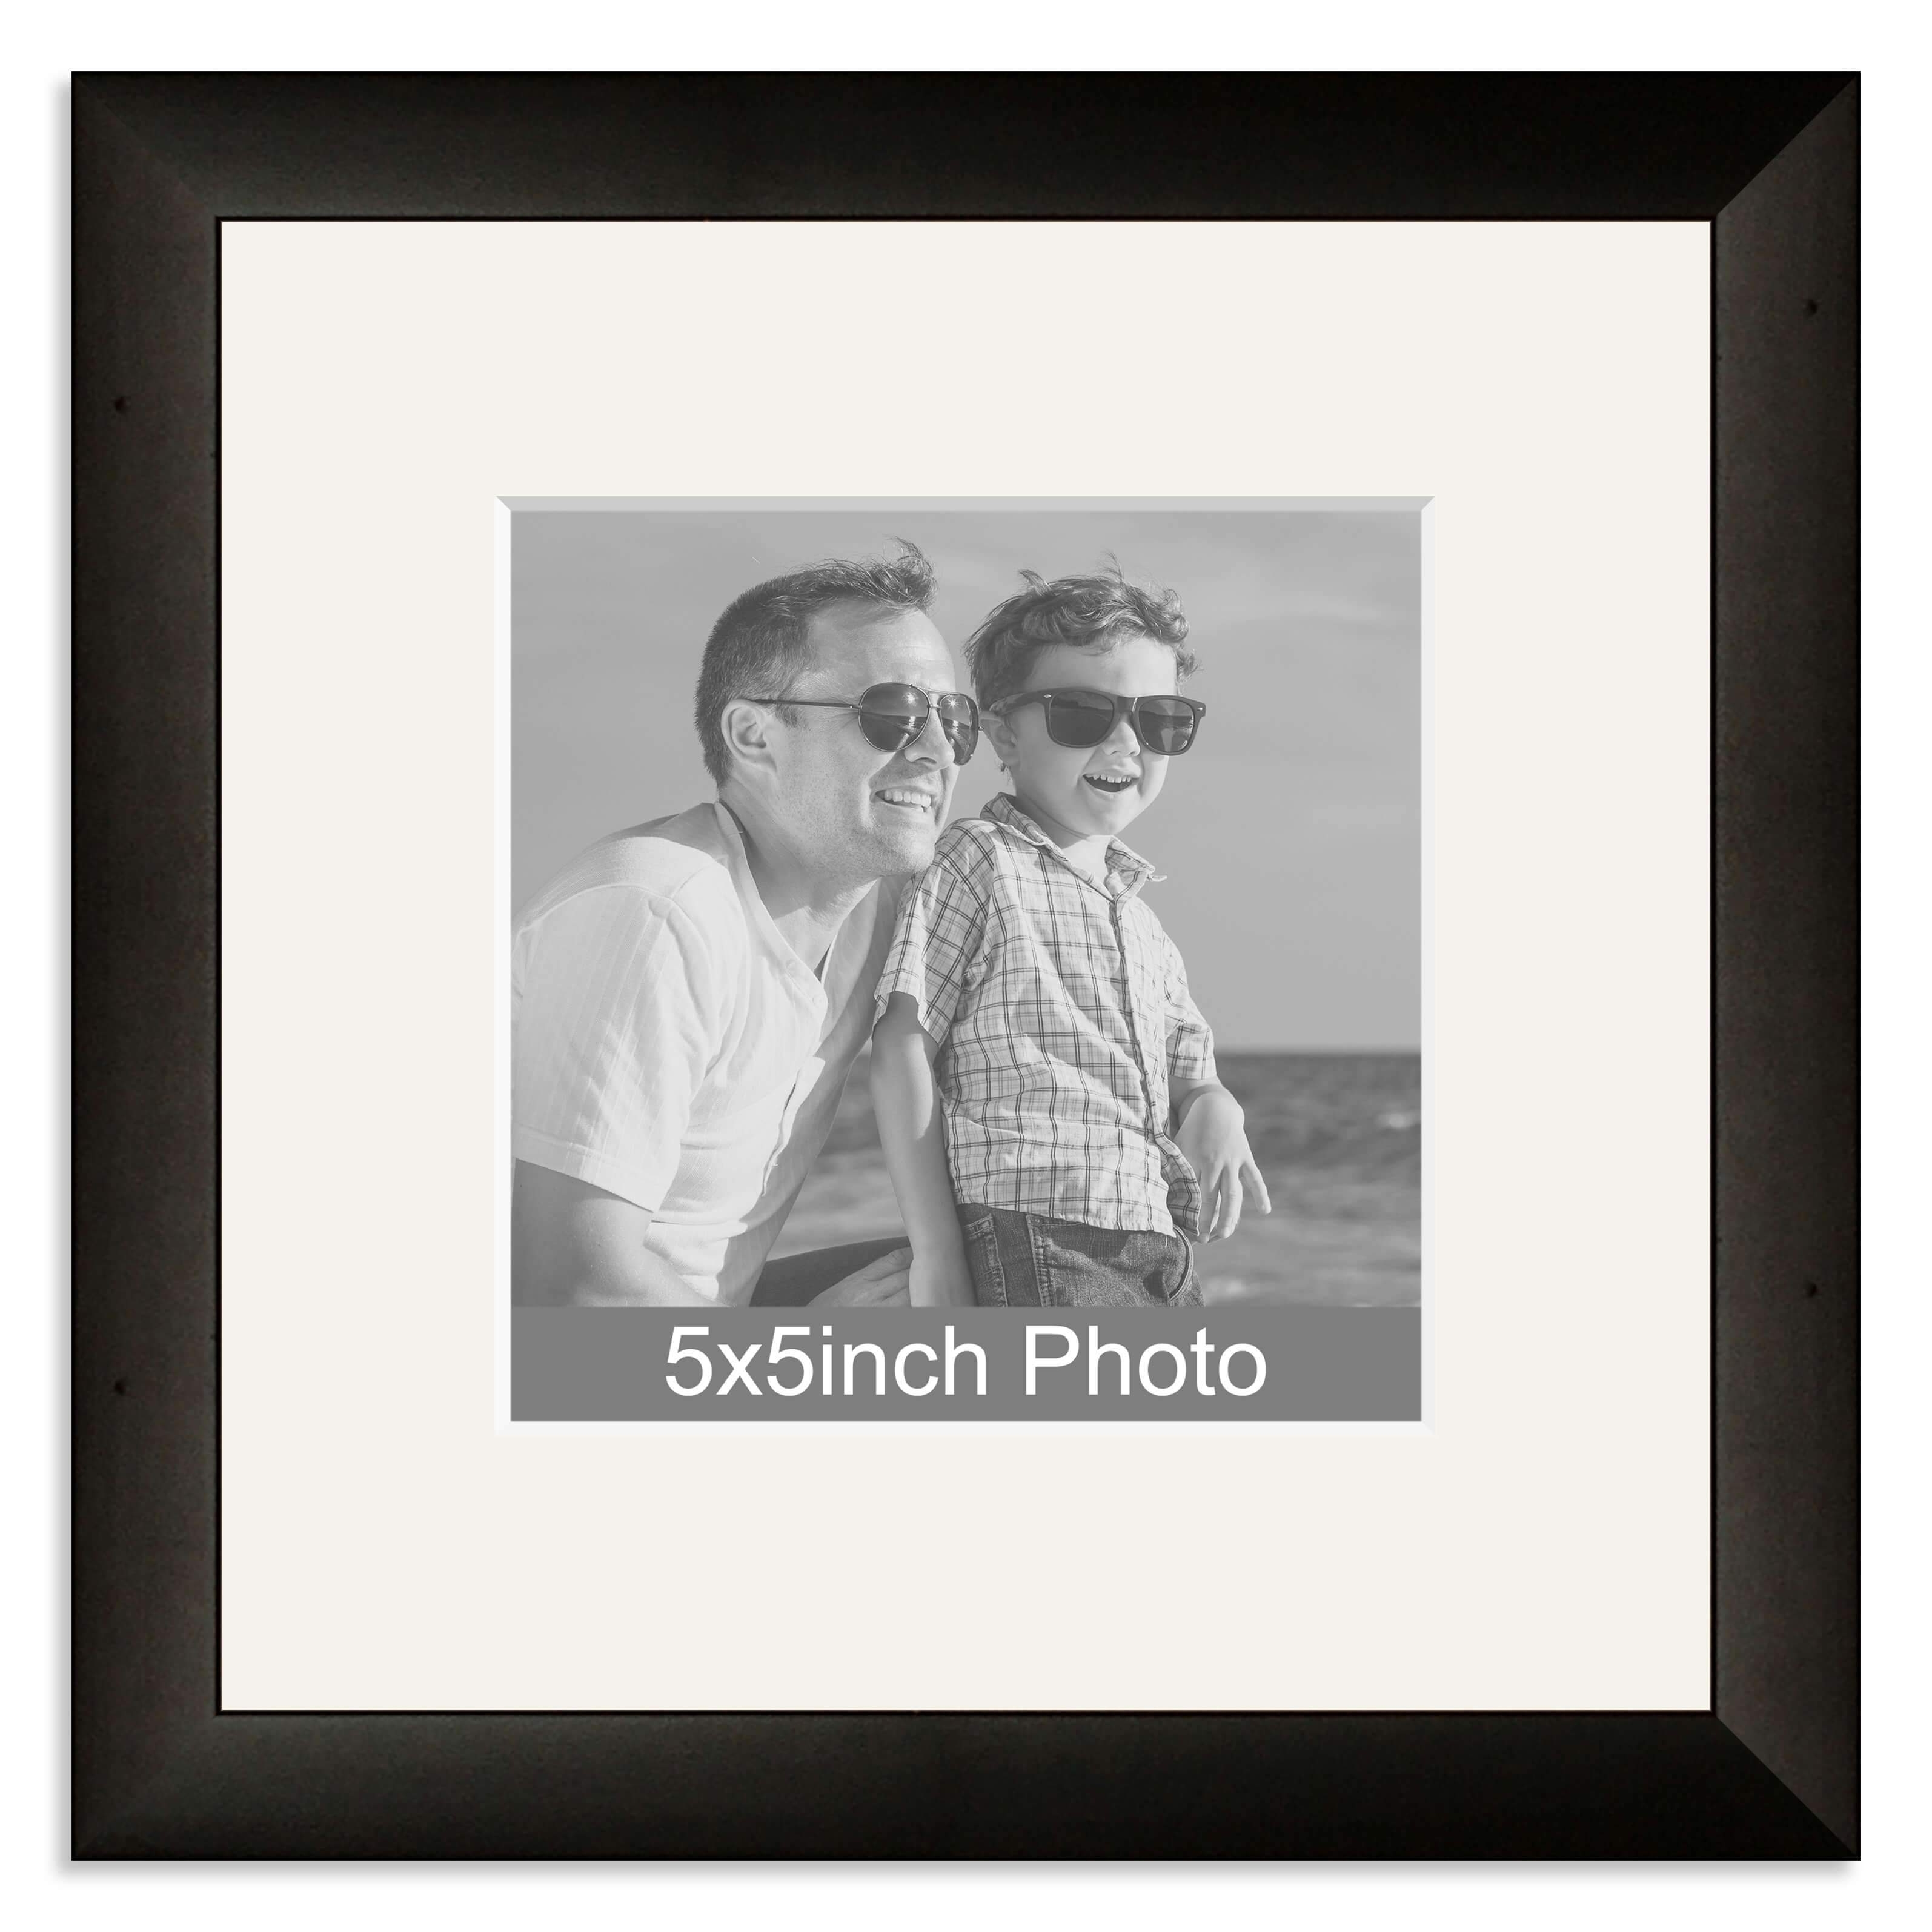 Black Wooden Photo Frame with mount for a 5x5in Photo – No Photo required